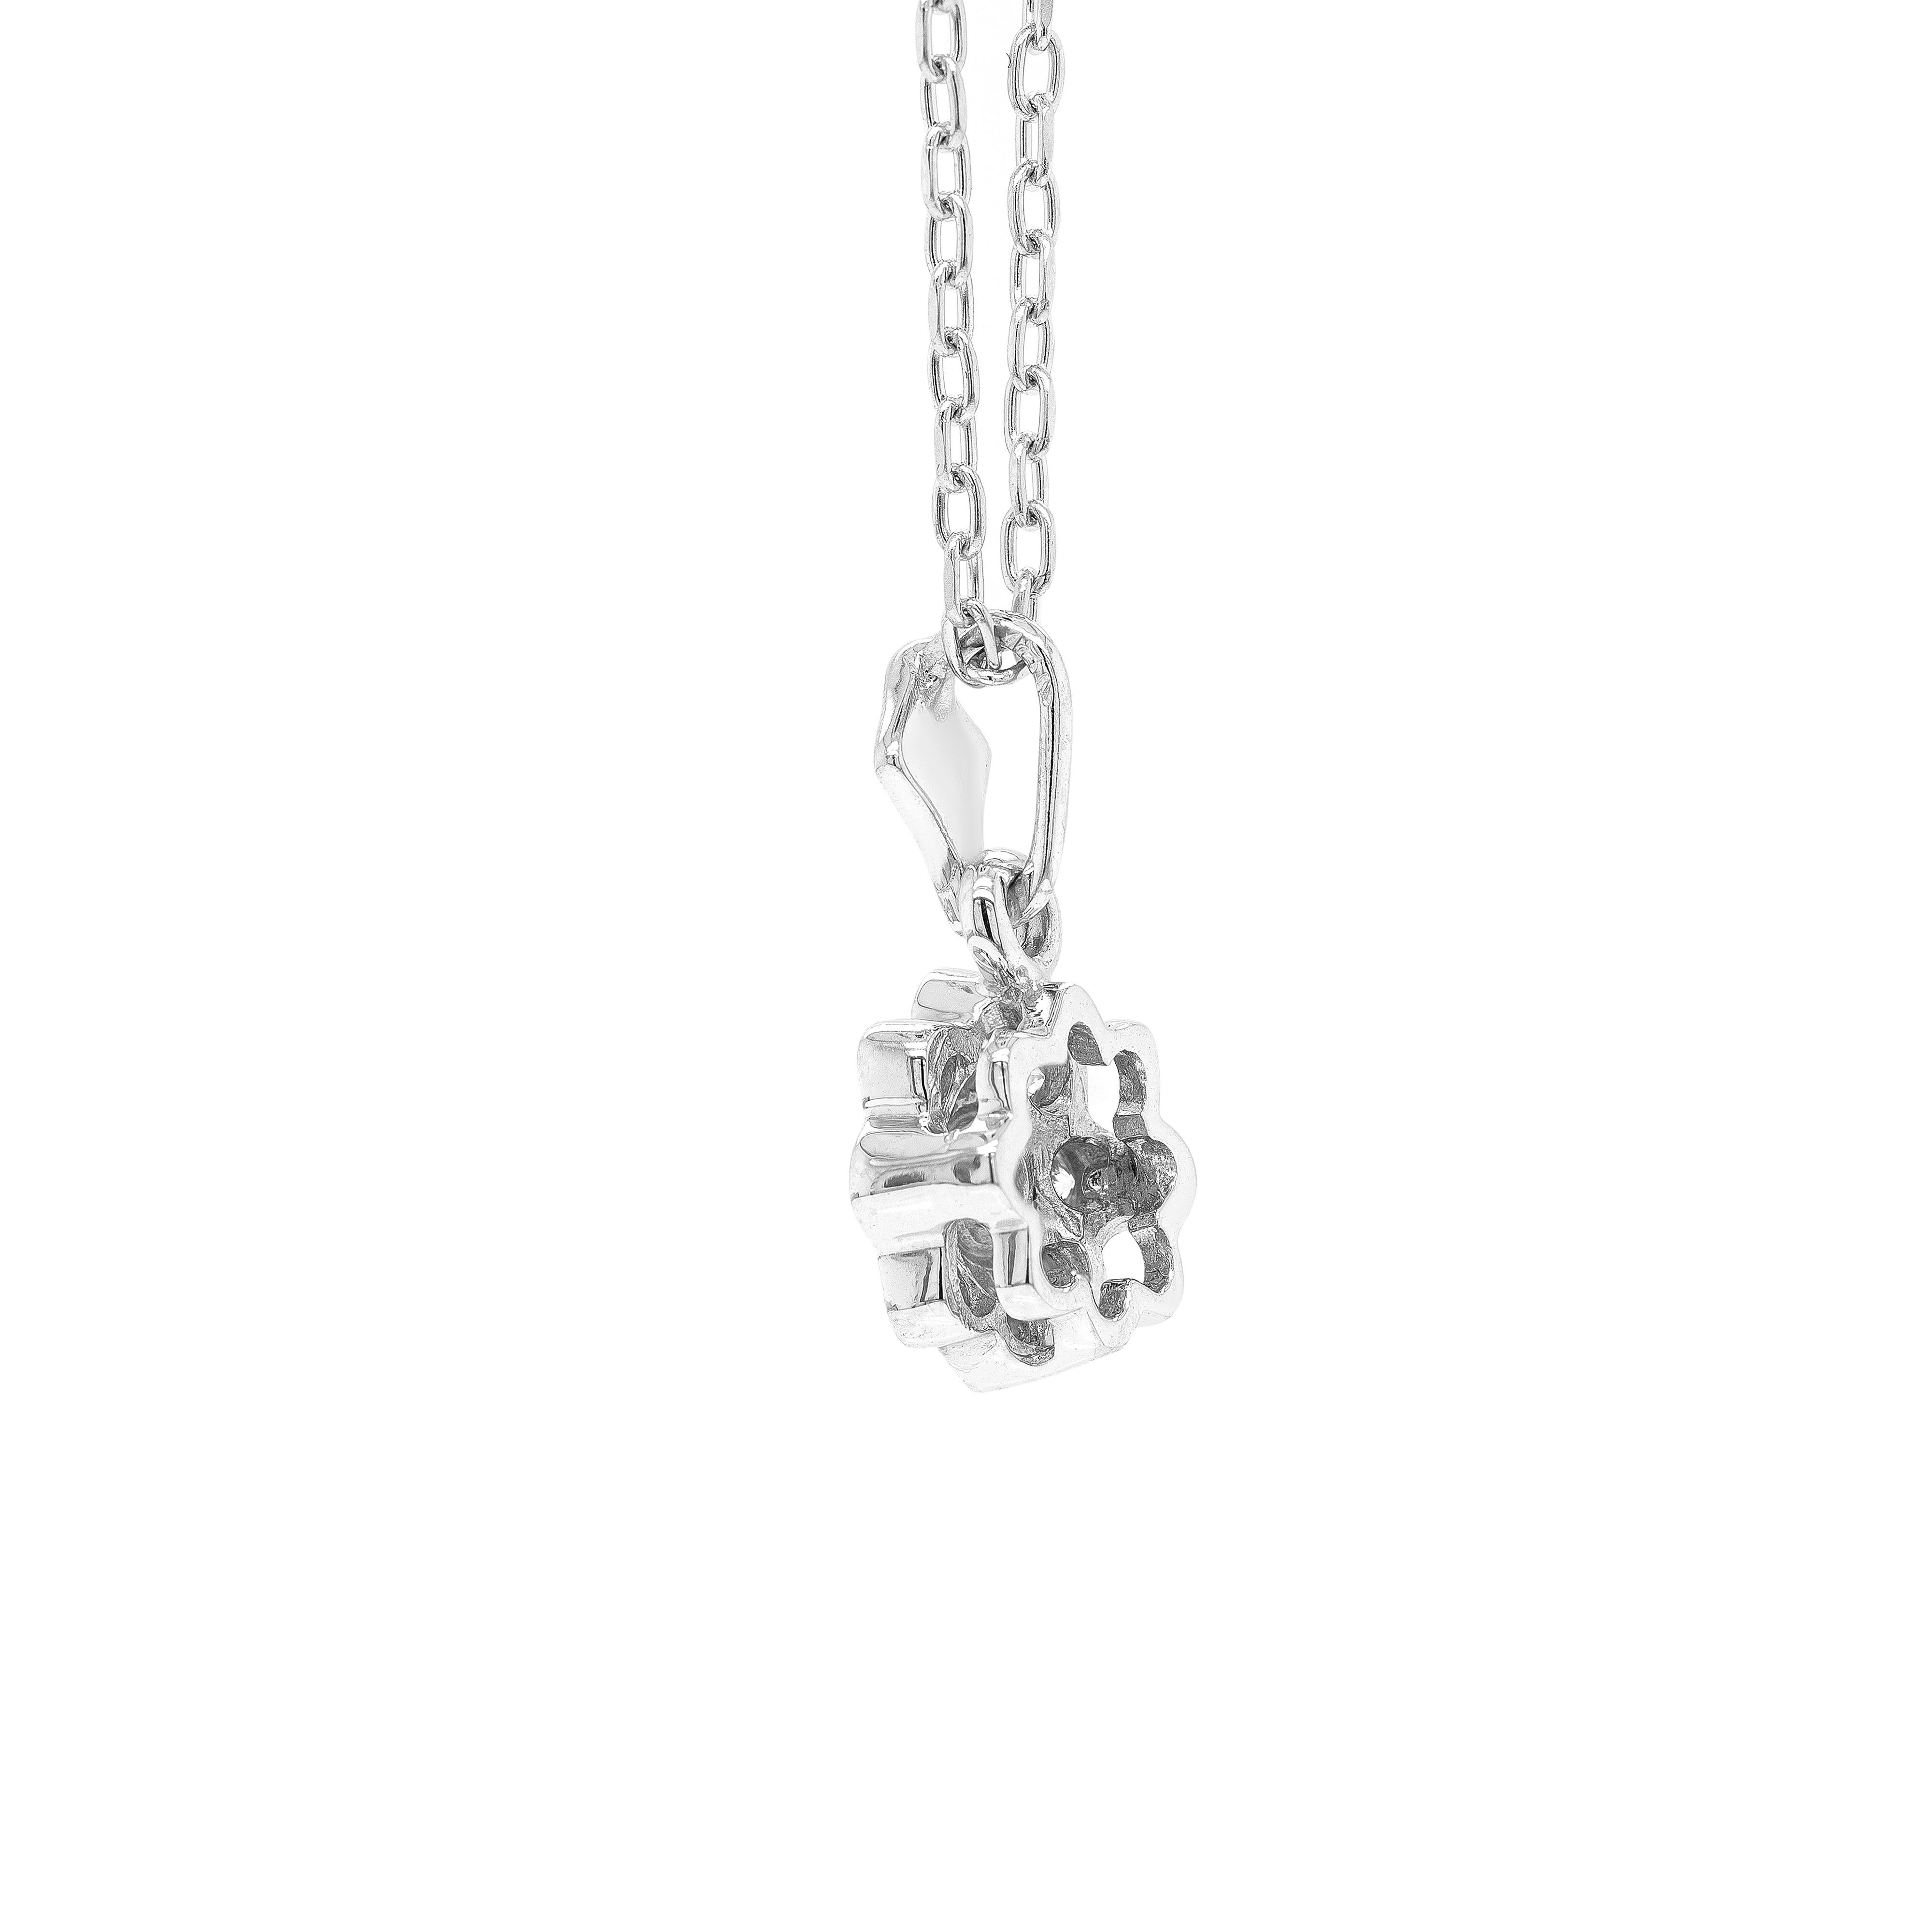 This beautiful pendant features a round brilliant cut diamond weighing 0.18ct, mounted in a rub-over, open back setting. The gorgeous centre stone is surrounded by 8 round brilliant cut diamonds weighing a total of 0.27ct, all mounted in 18 carat